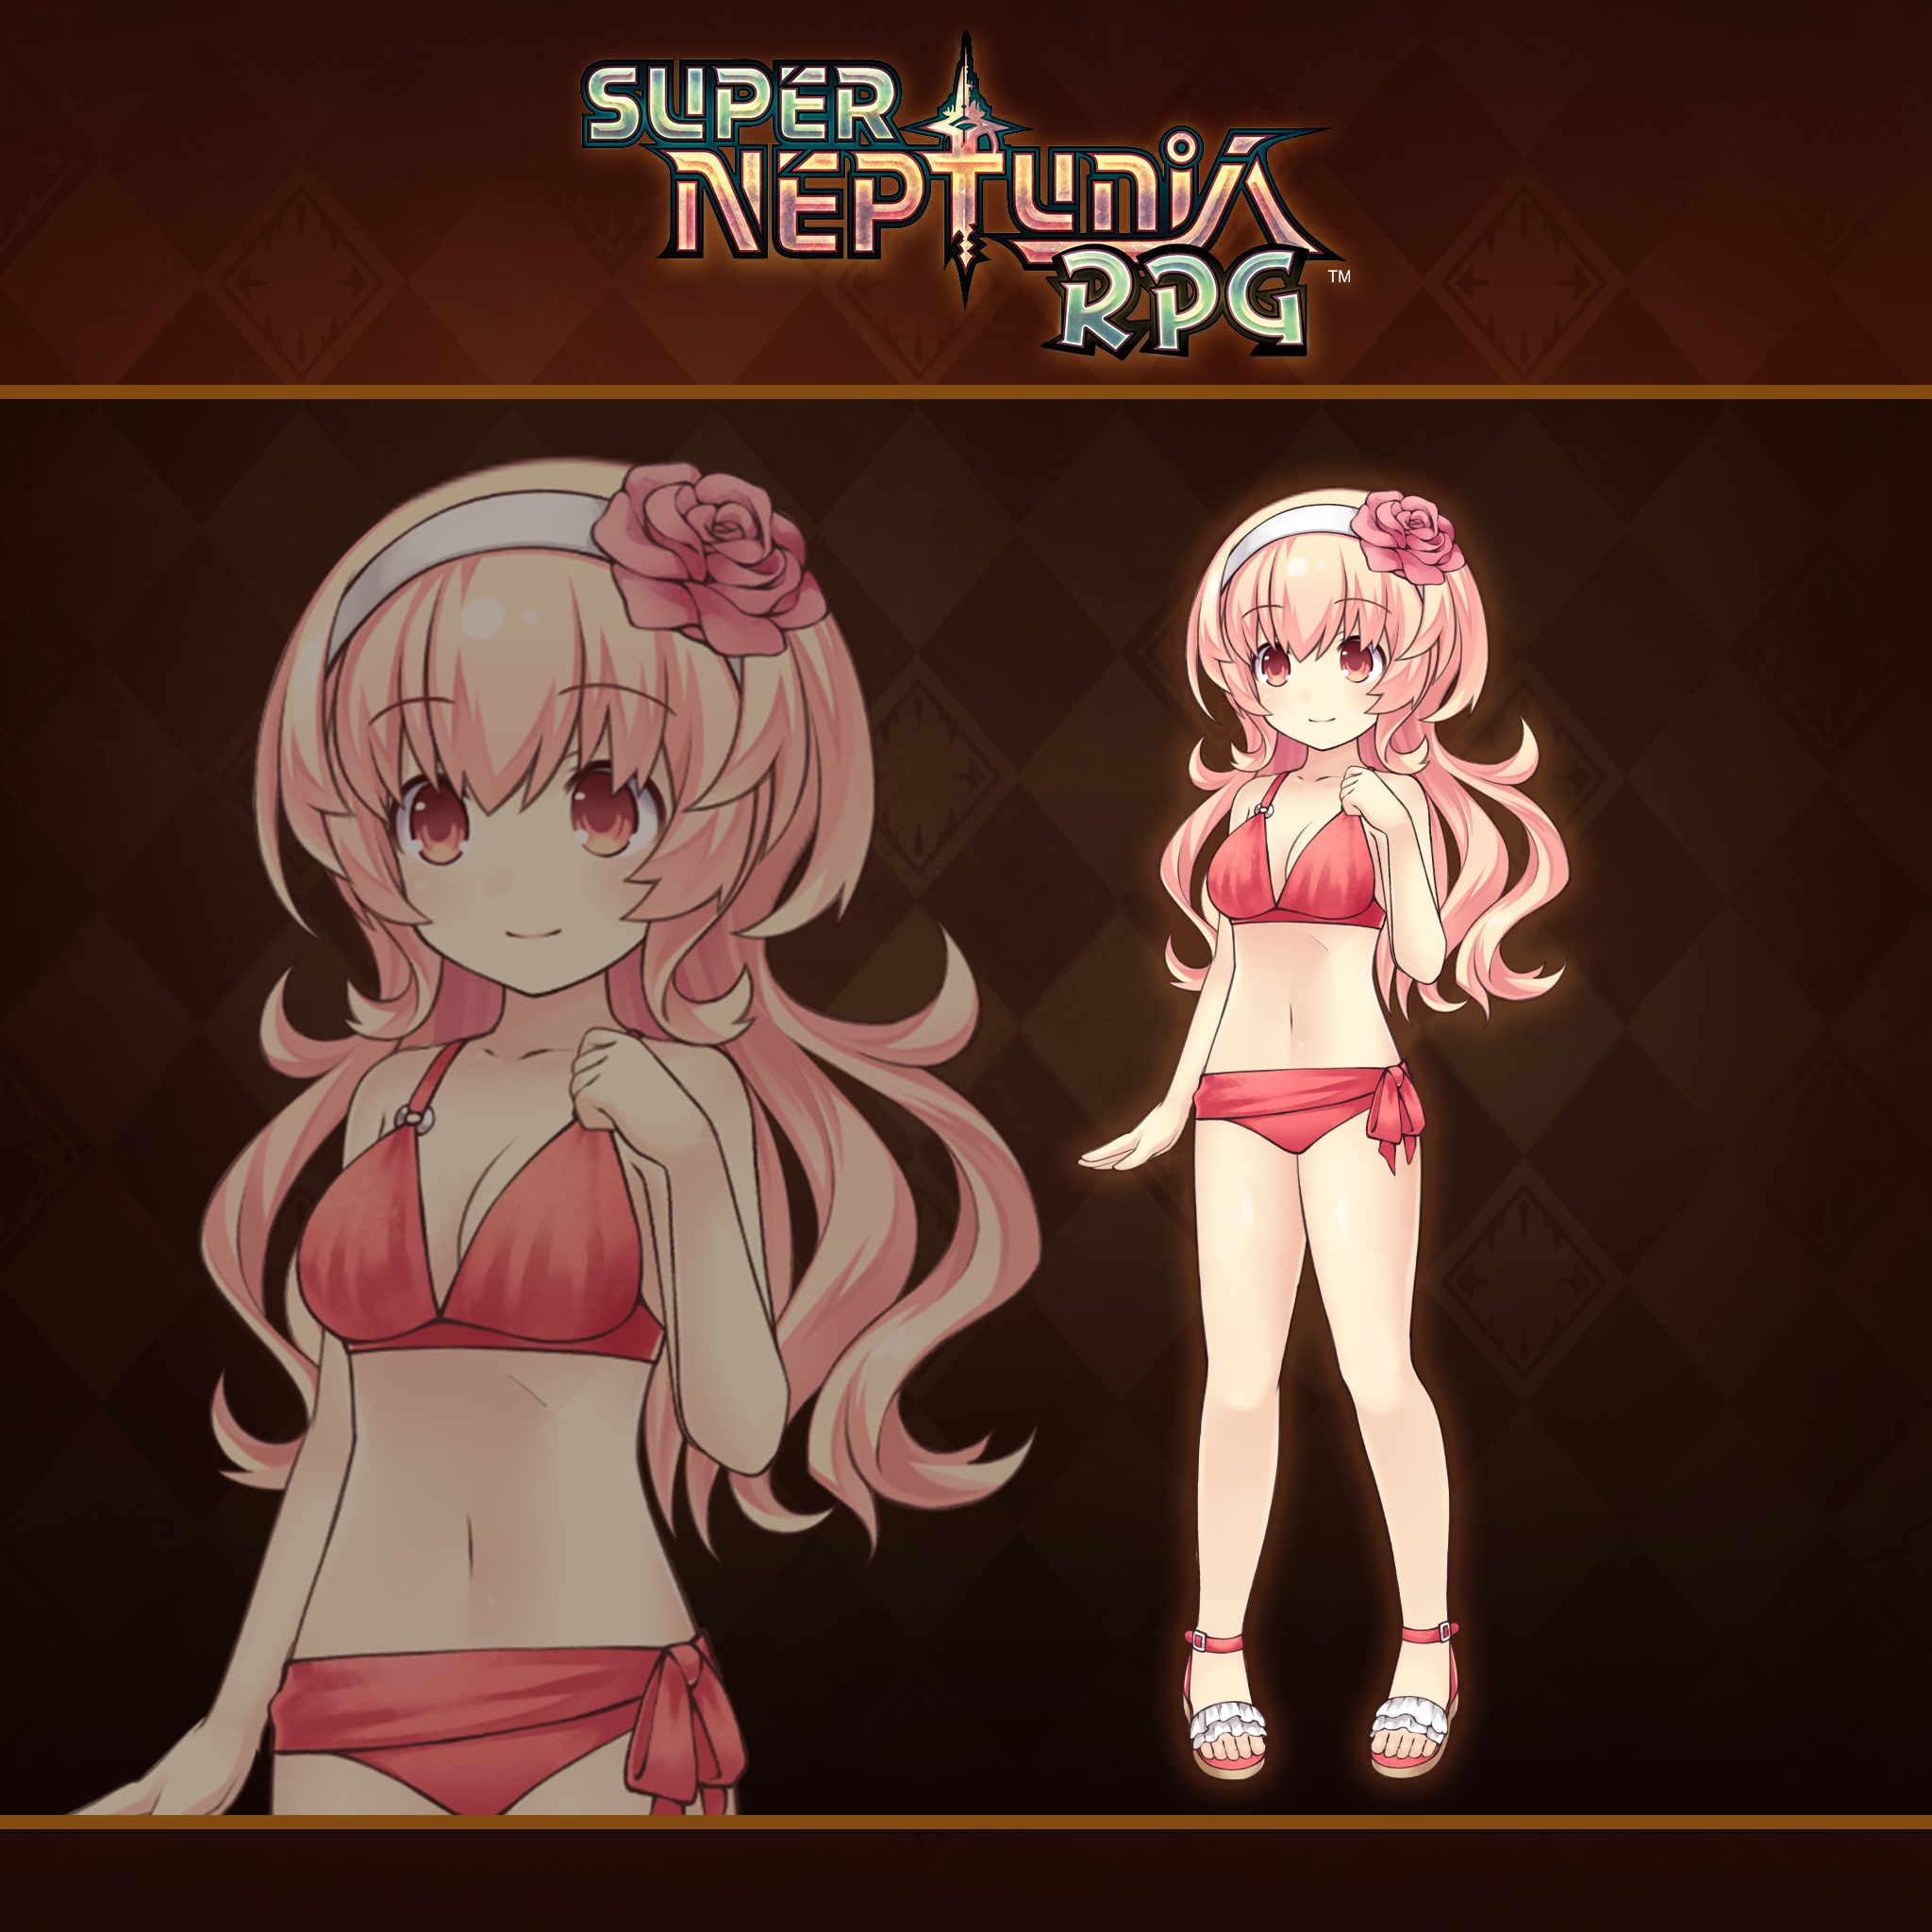 Super Neptunia RPG - Compa Swimsuit Outfit